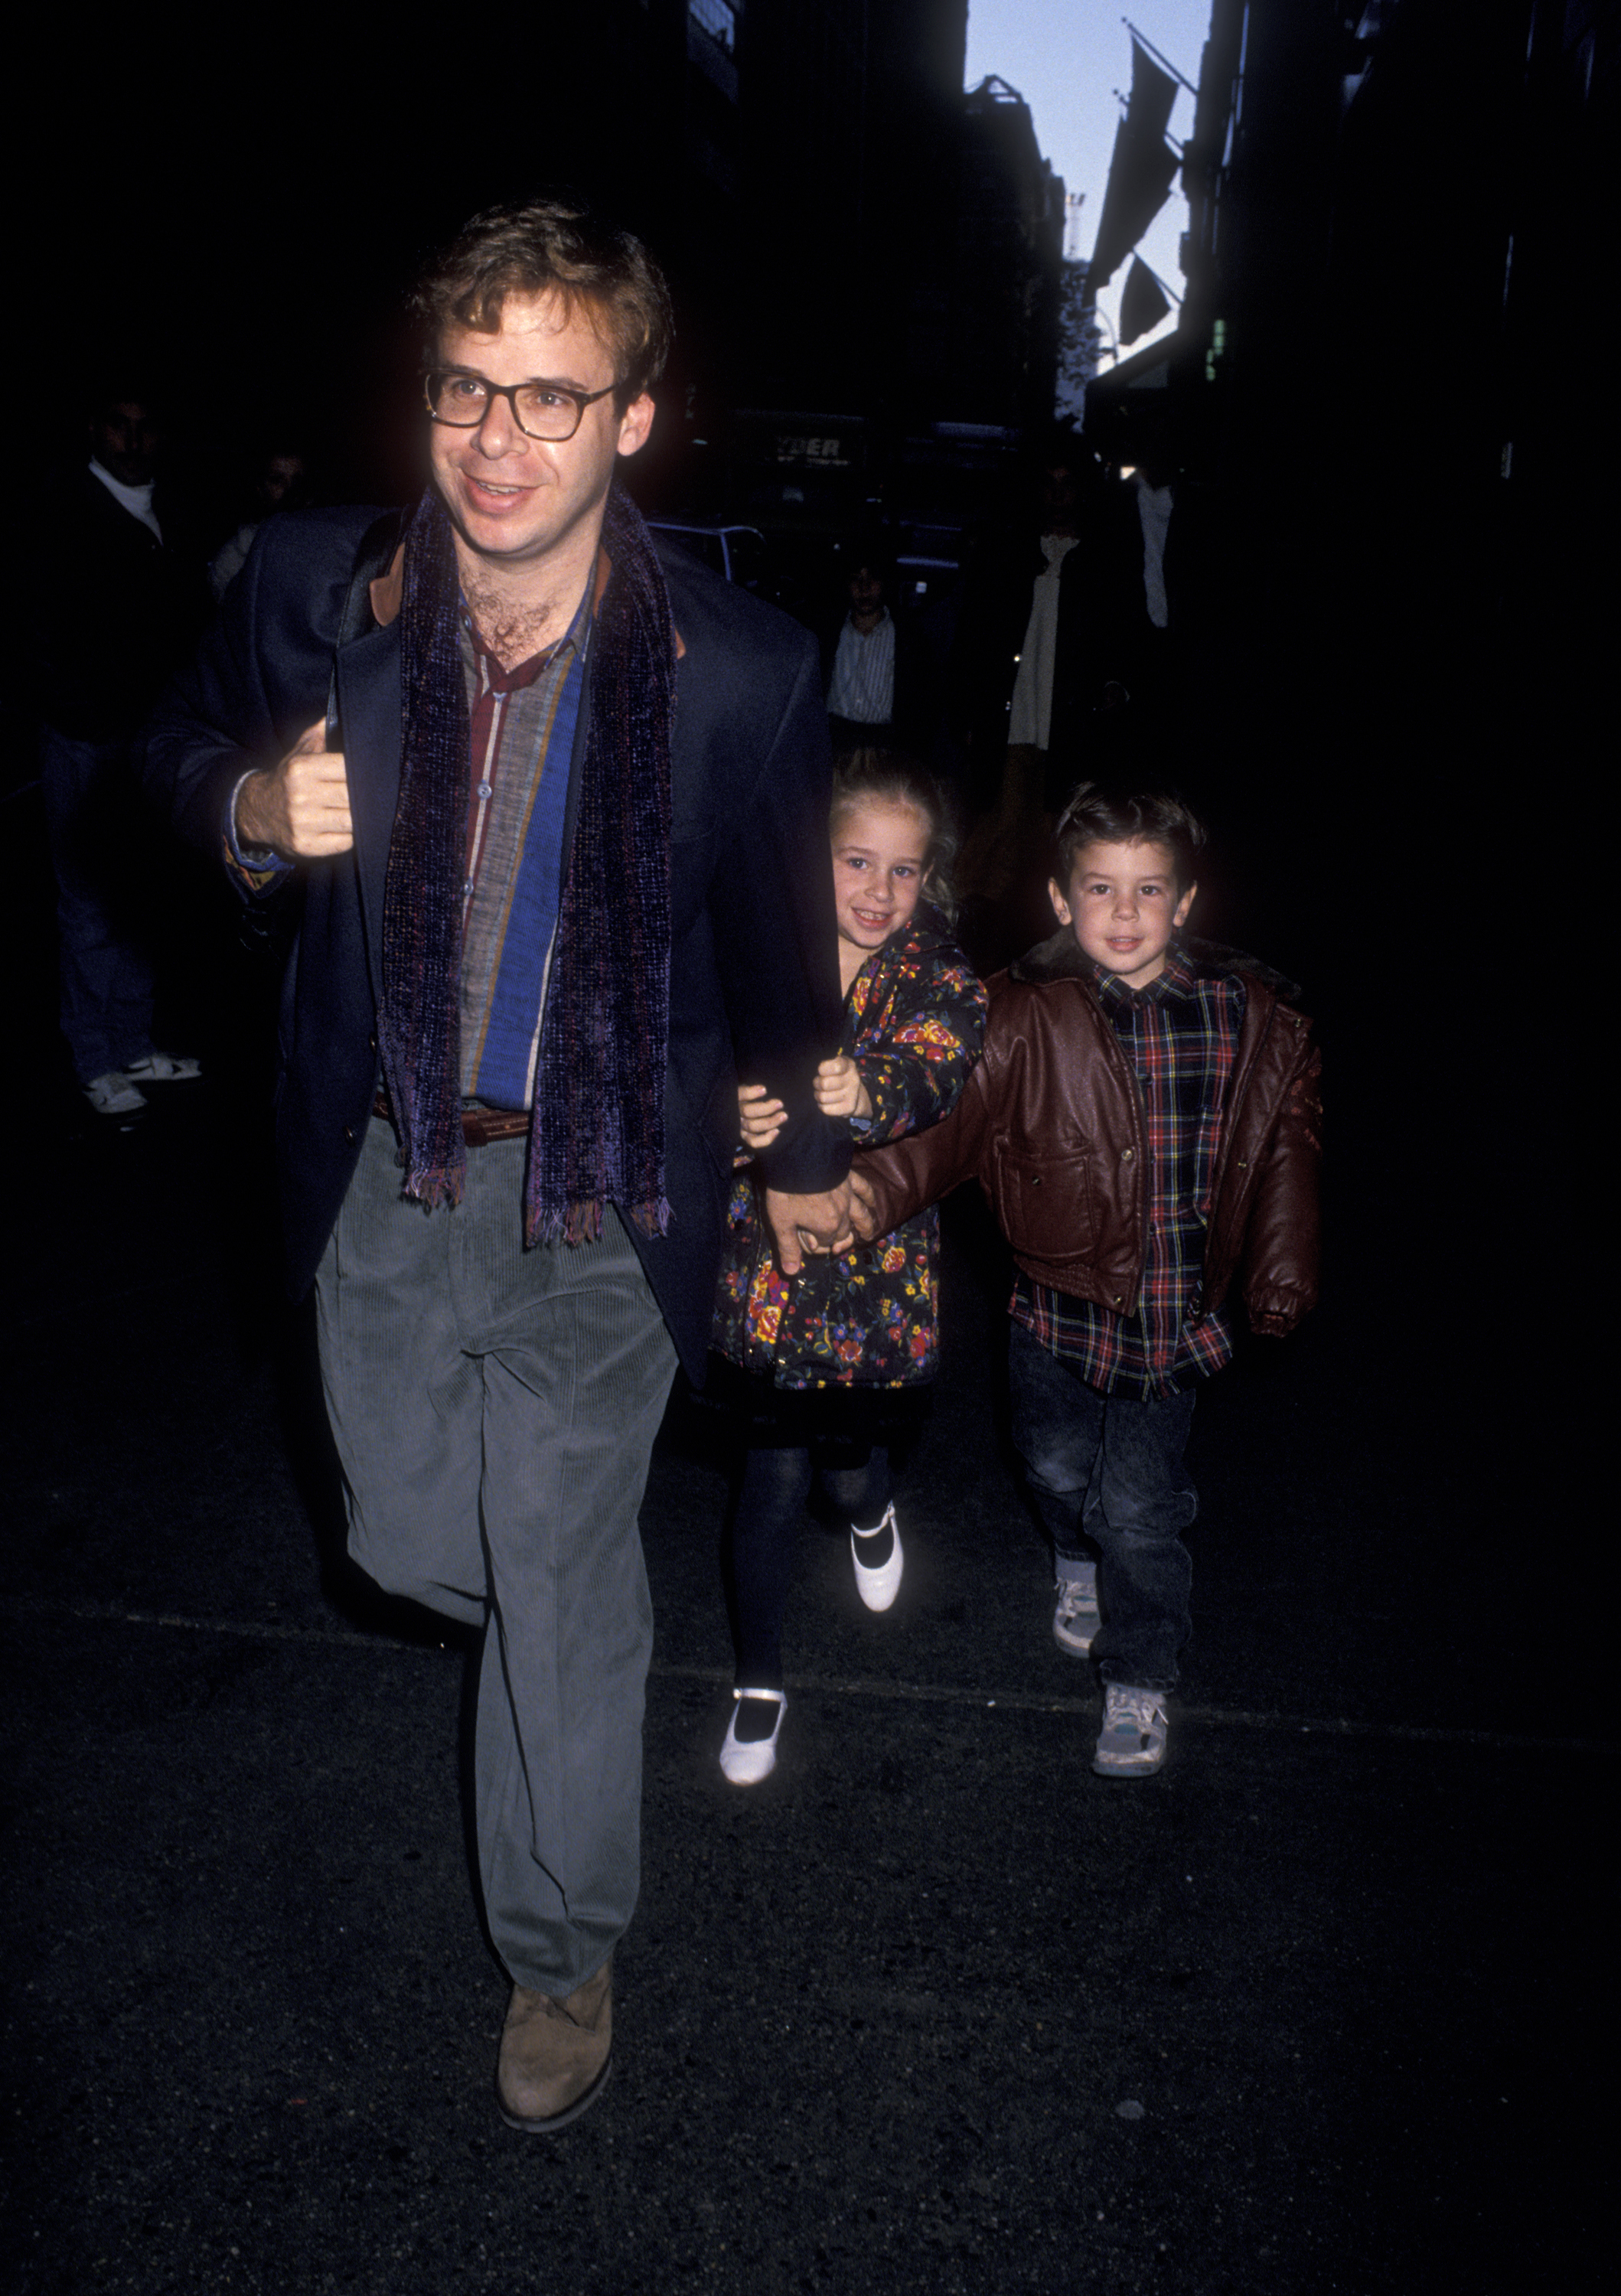 Rick, Rachel, and Mitchell Moranis at the premiere of "The Nutcracker" in New York City in 1993 | Source: Getty Images